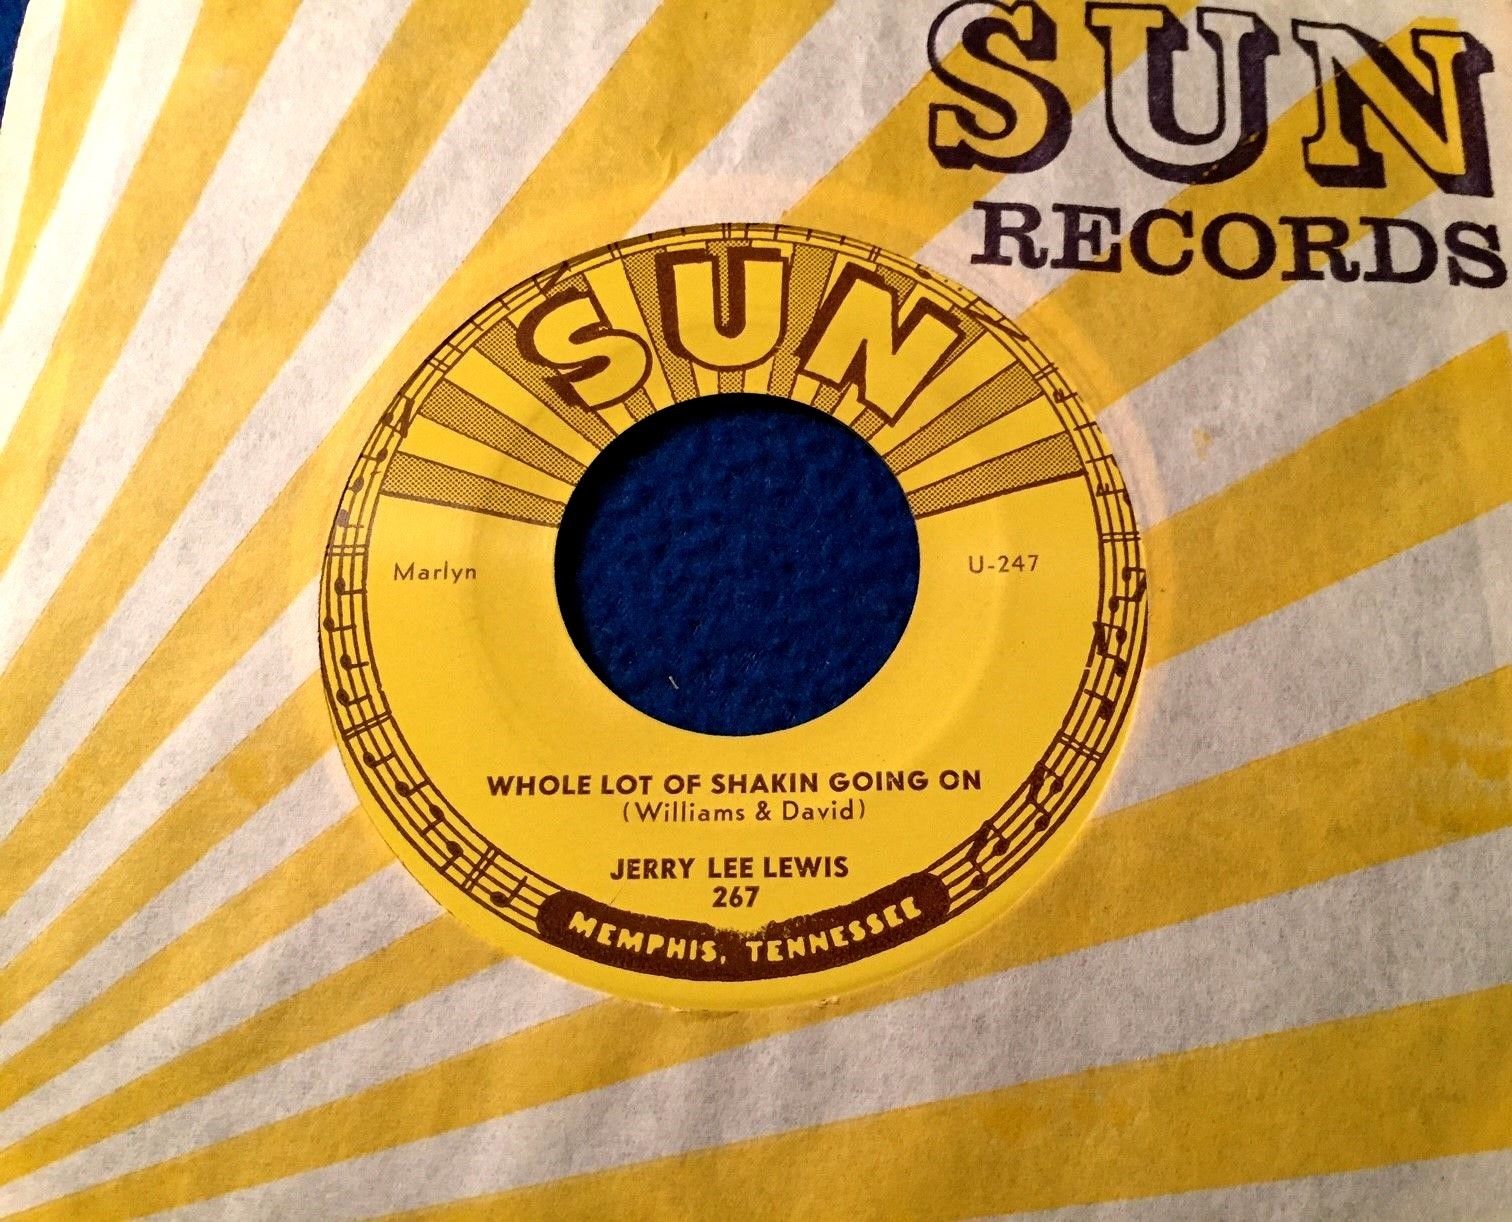  - JERRY LEE LEWIS WHOLE LOTTA SHAKIN GOING ON / IT'LL BE ME SUN  45 nm W/ SLEEVE - auction details